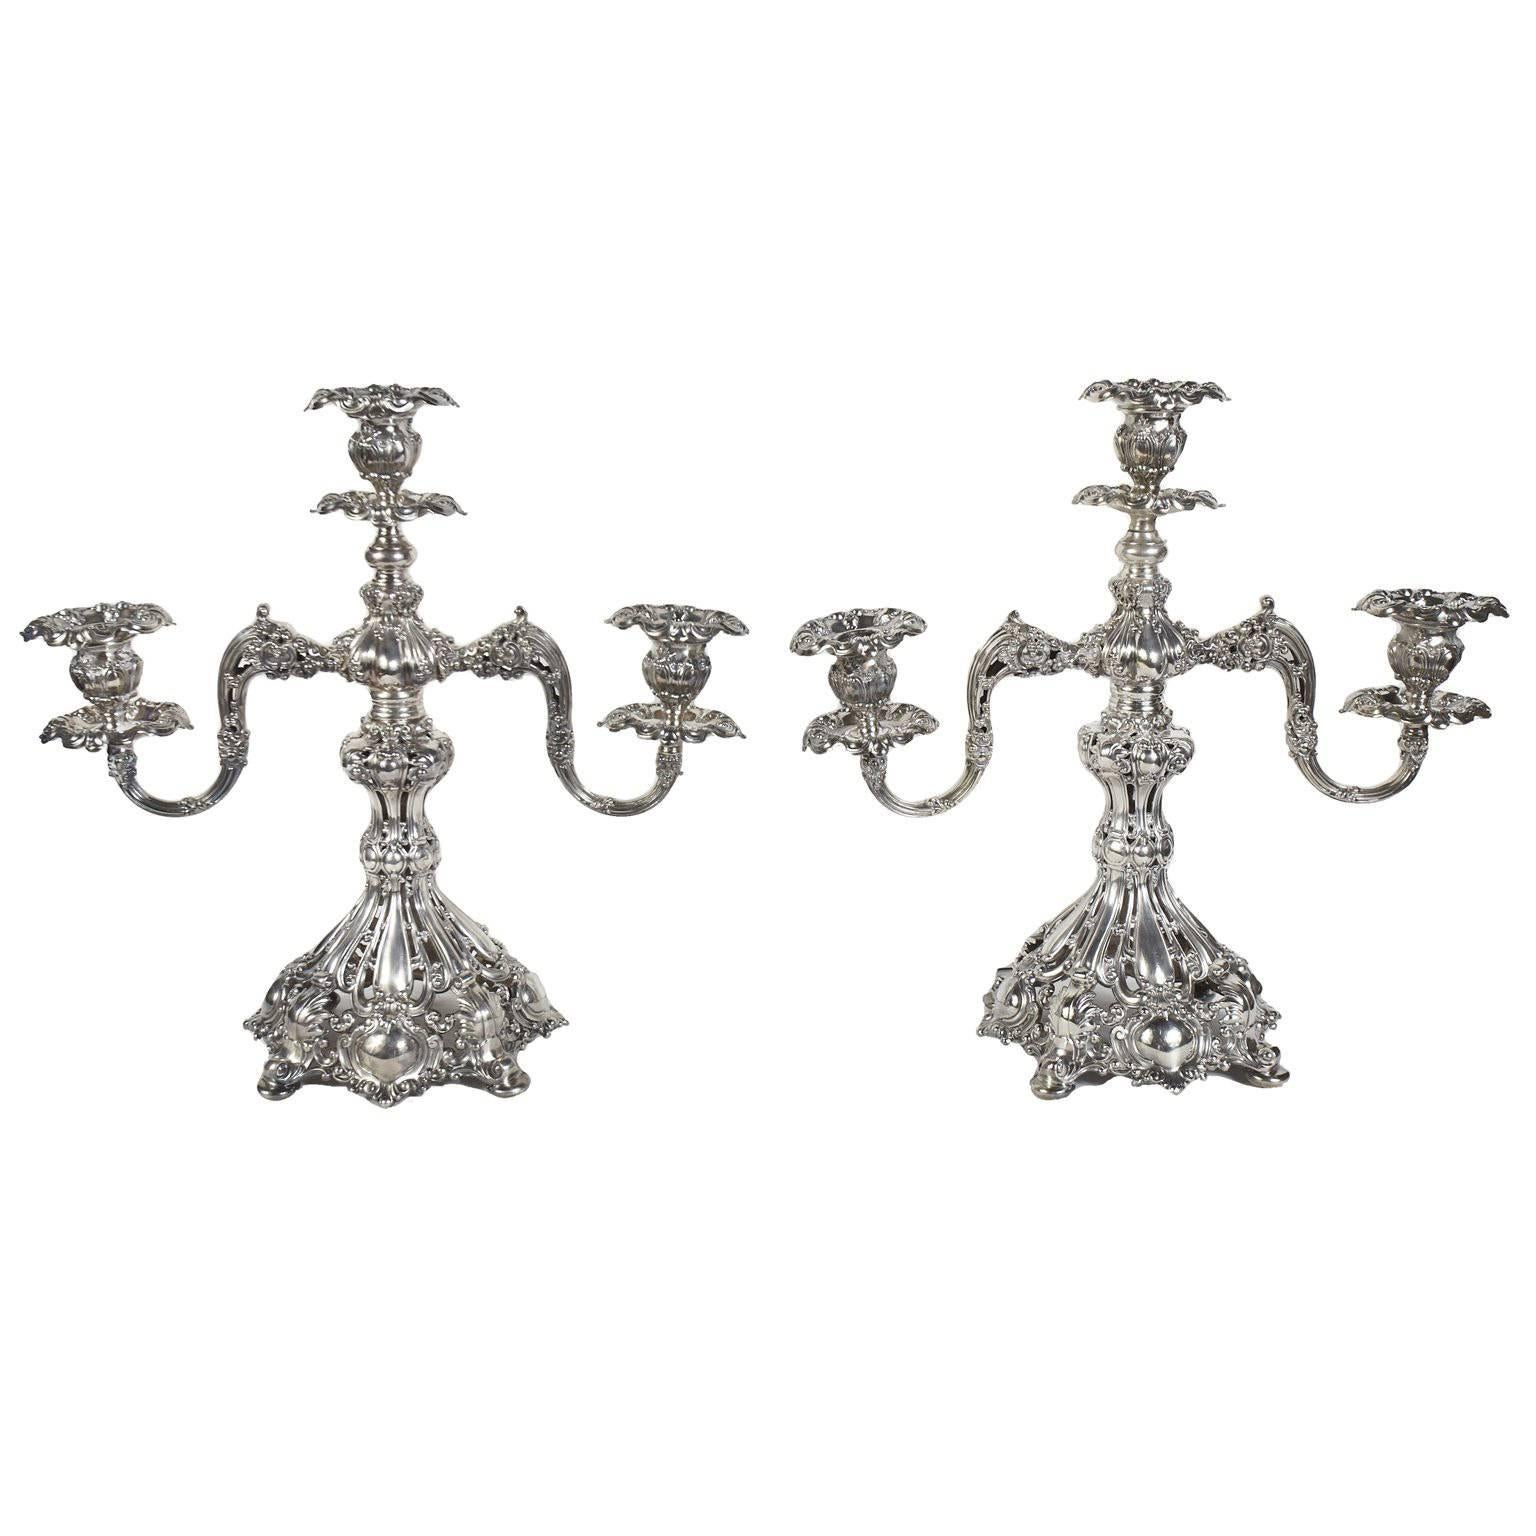 Late 19th Century Silver Plate Reed and Barton Candelabras "Renaissance" Pattern For Sale